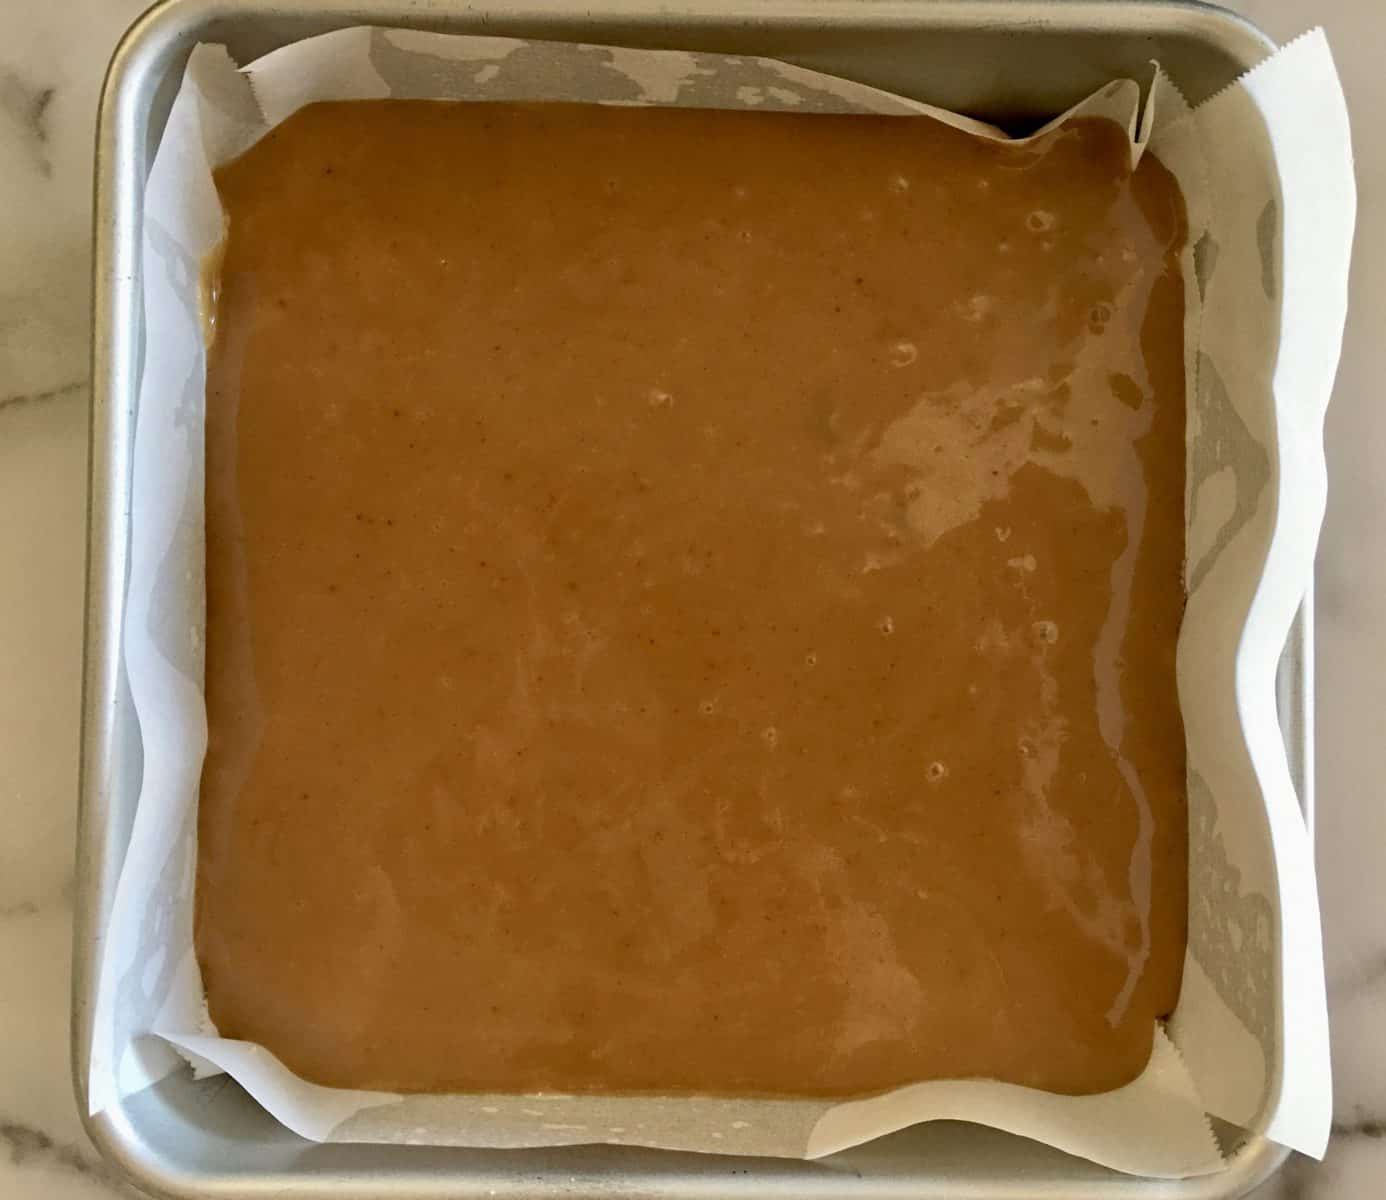 caramel layer on top of the salted chocolate caramel squares.